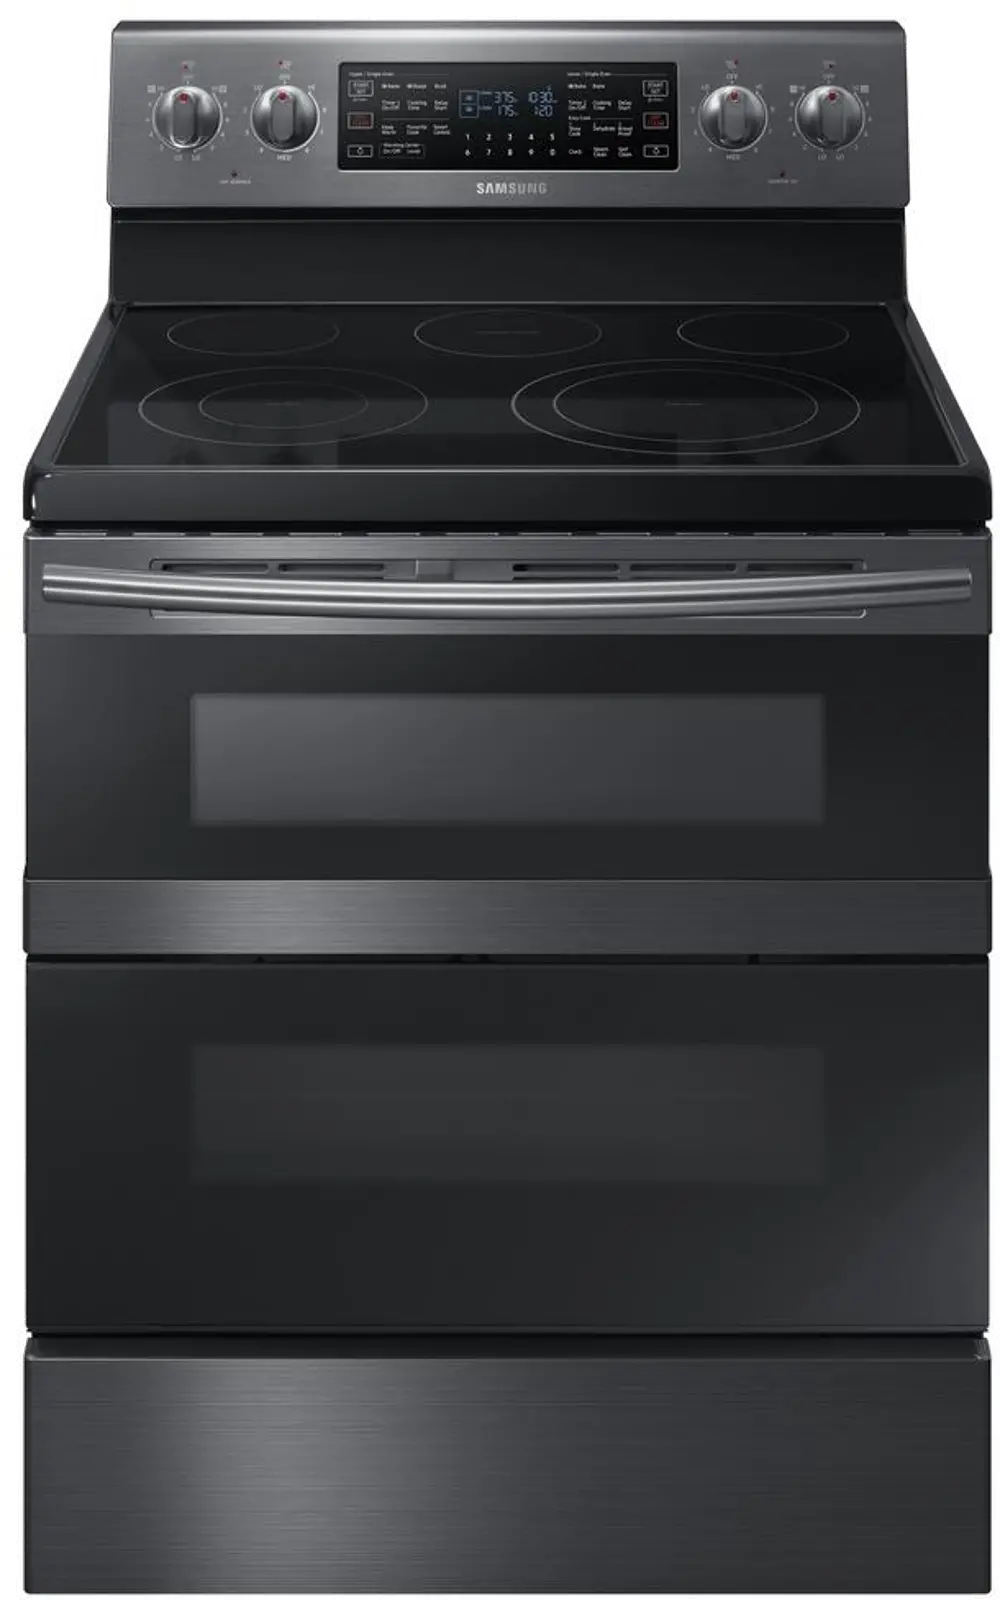 NE59M6850SG Samsung Electric Range with WiFi connectivity - 5.9 cu. ft. Black Stainless Steel-1